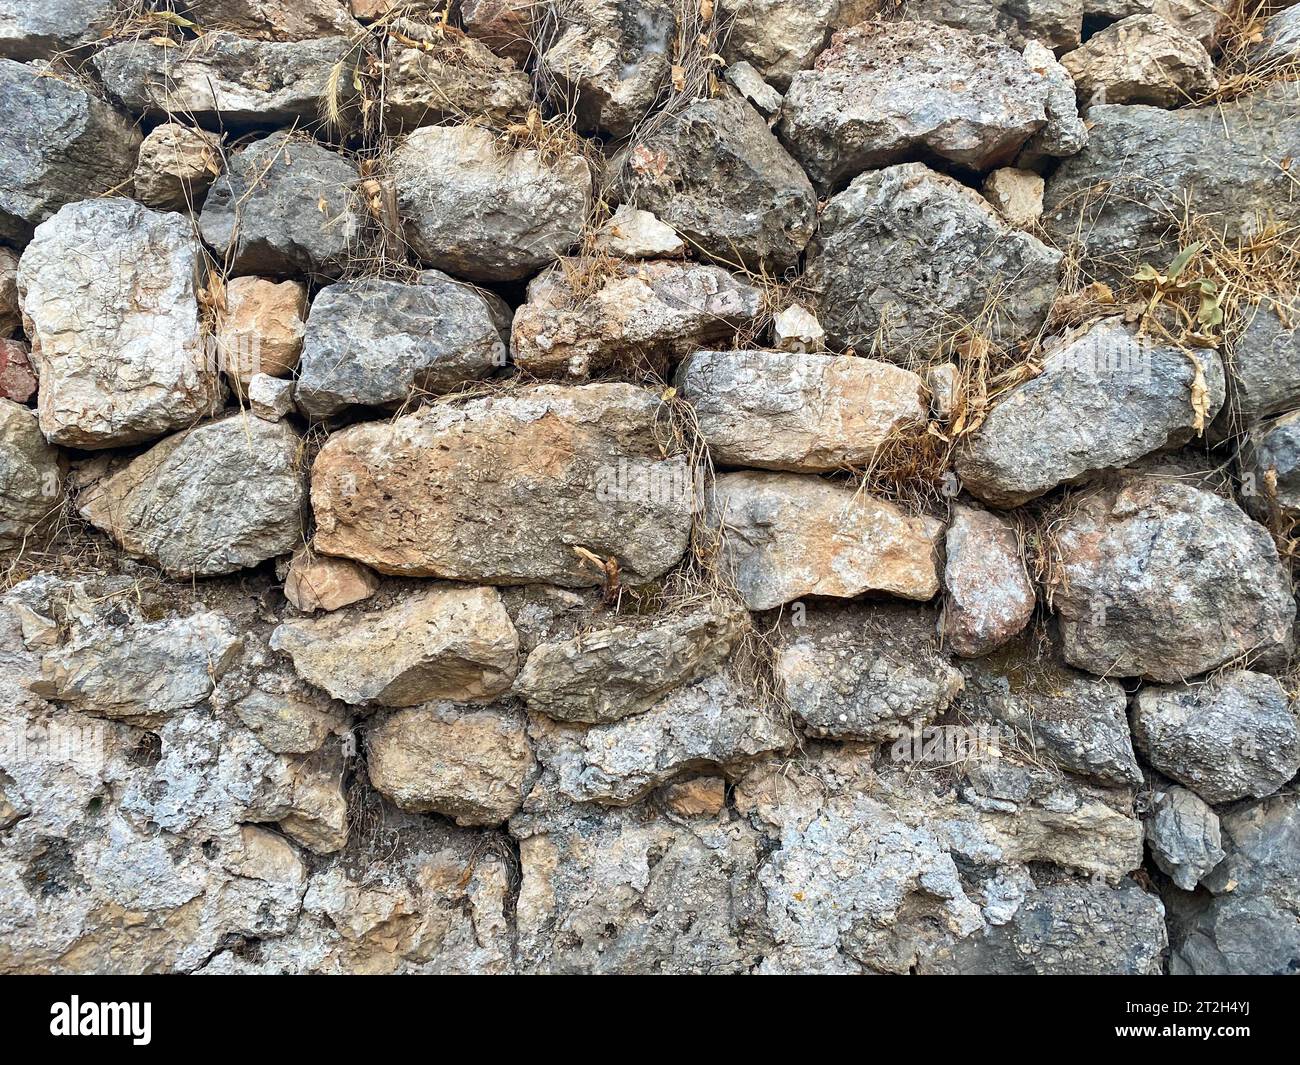 https://c8.alamy.com/comp/2T2H4YJ/background-texture-stone-wall-of-round-stones-cobblestones-bricks-natural-surface-natural-sharp-convex-rough-stone-cobblestone-with-cracks-2T2H4YJ.jpg